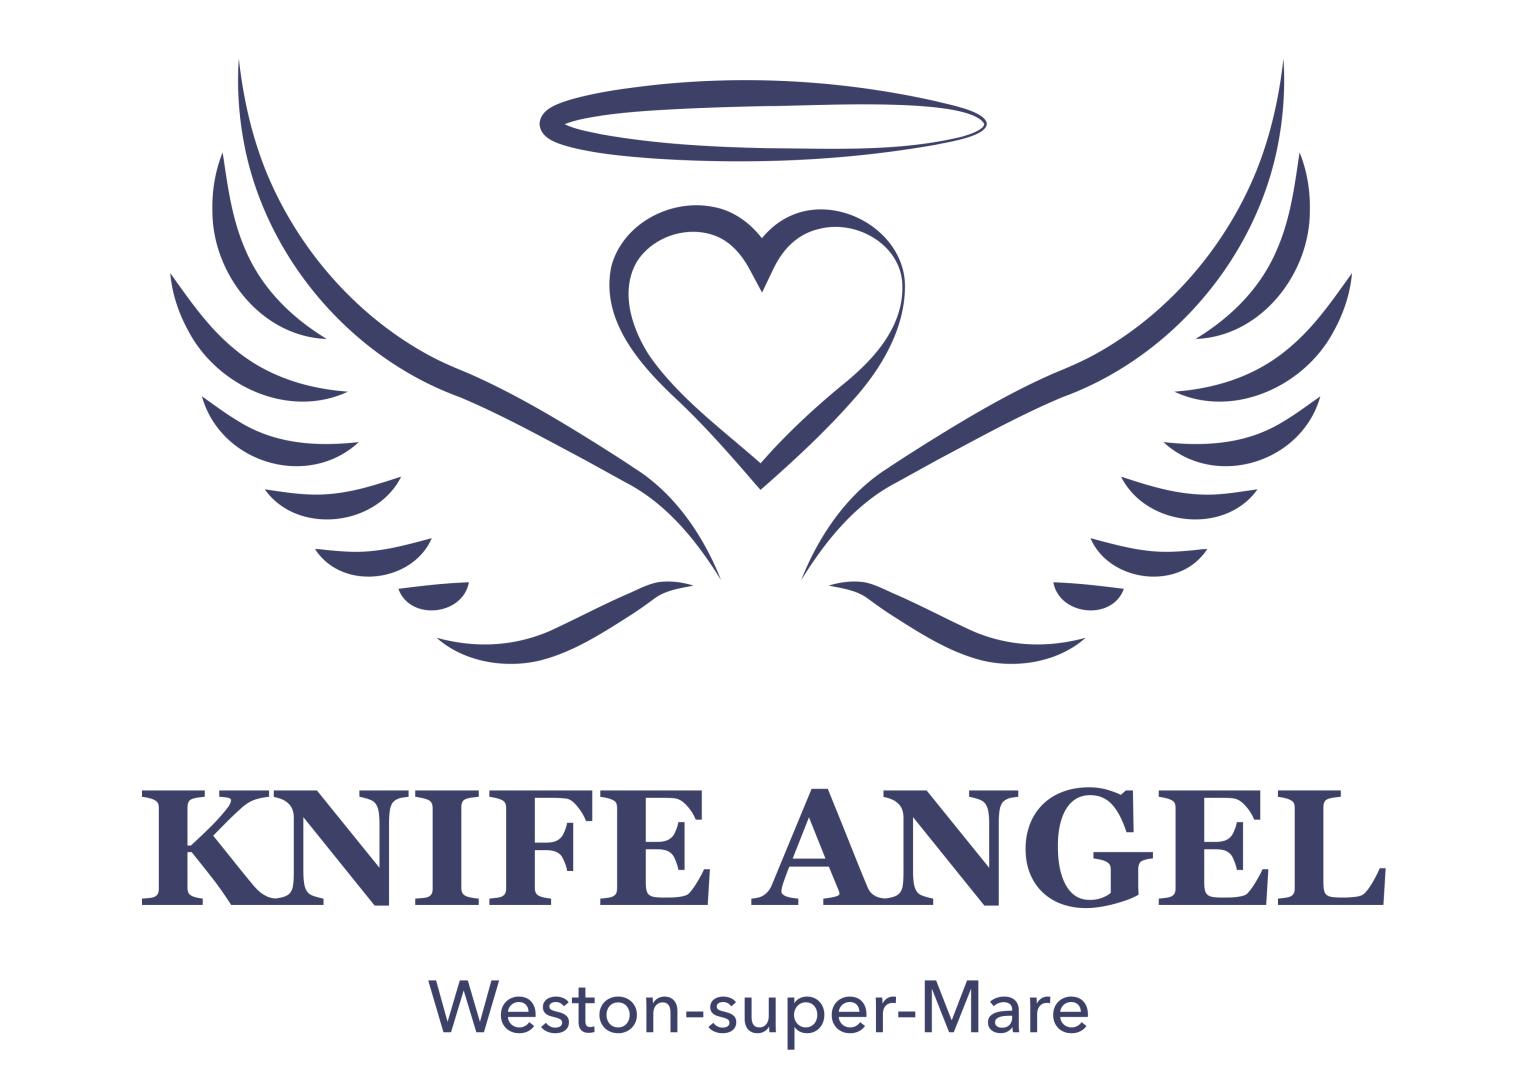 The logo for the Knife Angel's visit to Weston-super-Mare, showing two angel wings framing a heart with a halo